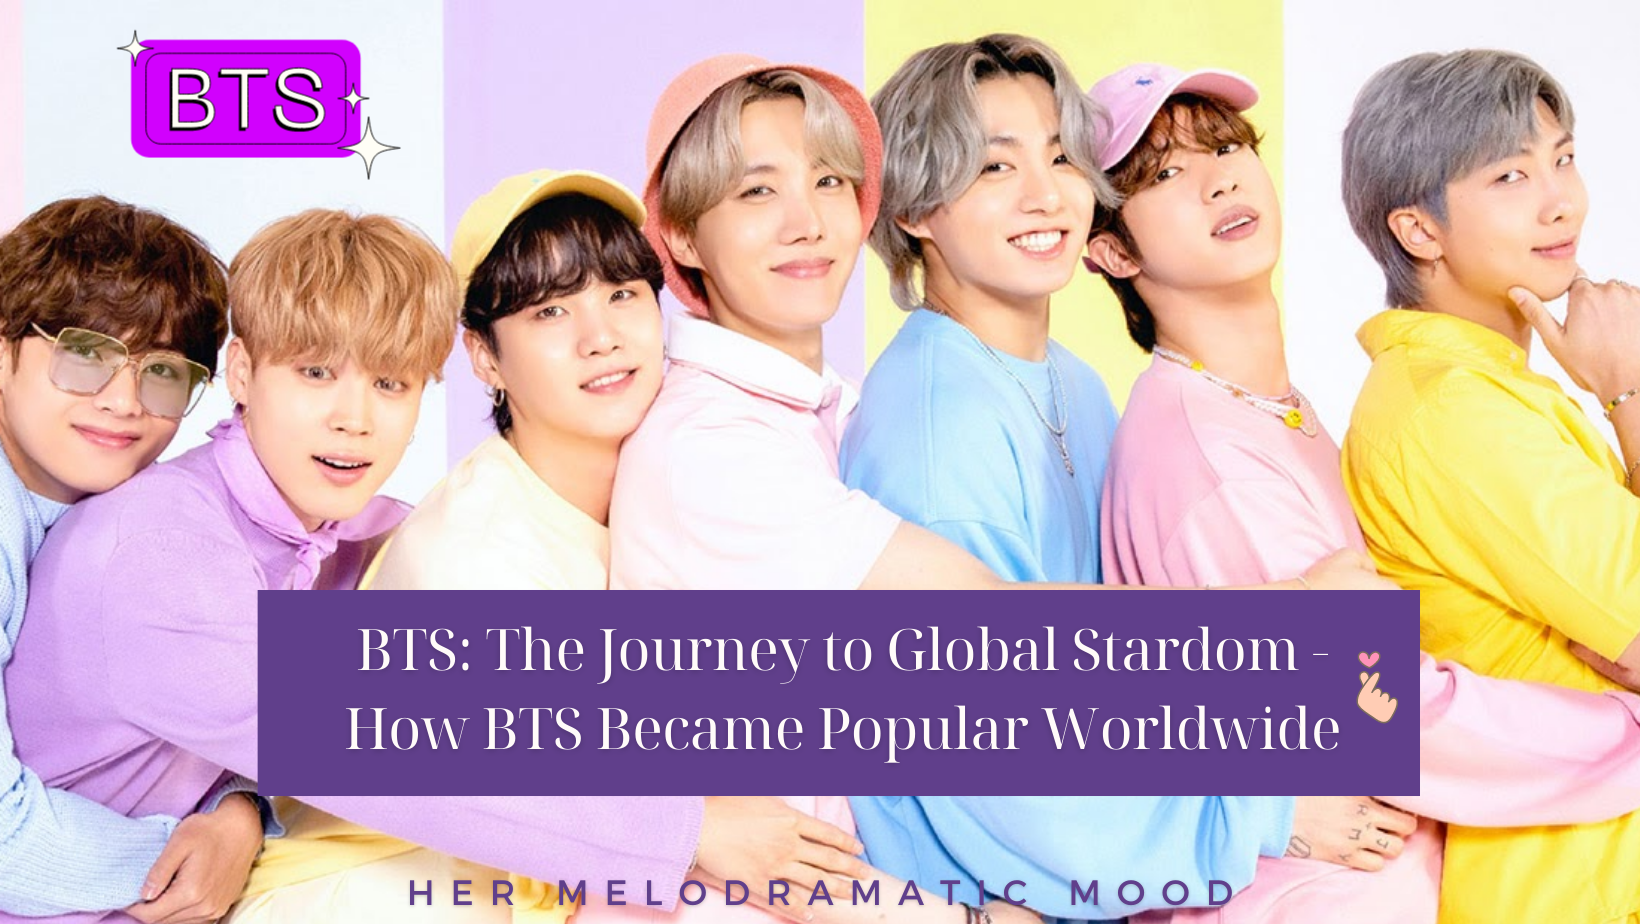 BTS: The Journey to Global Stardom - How BTS Became Popular Worldwide